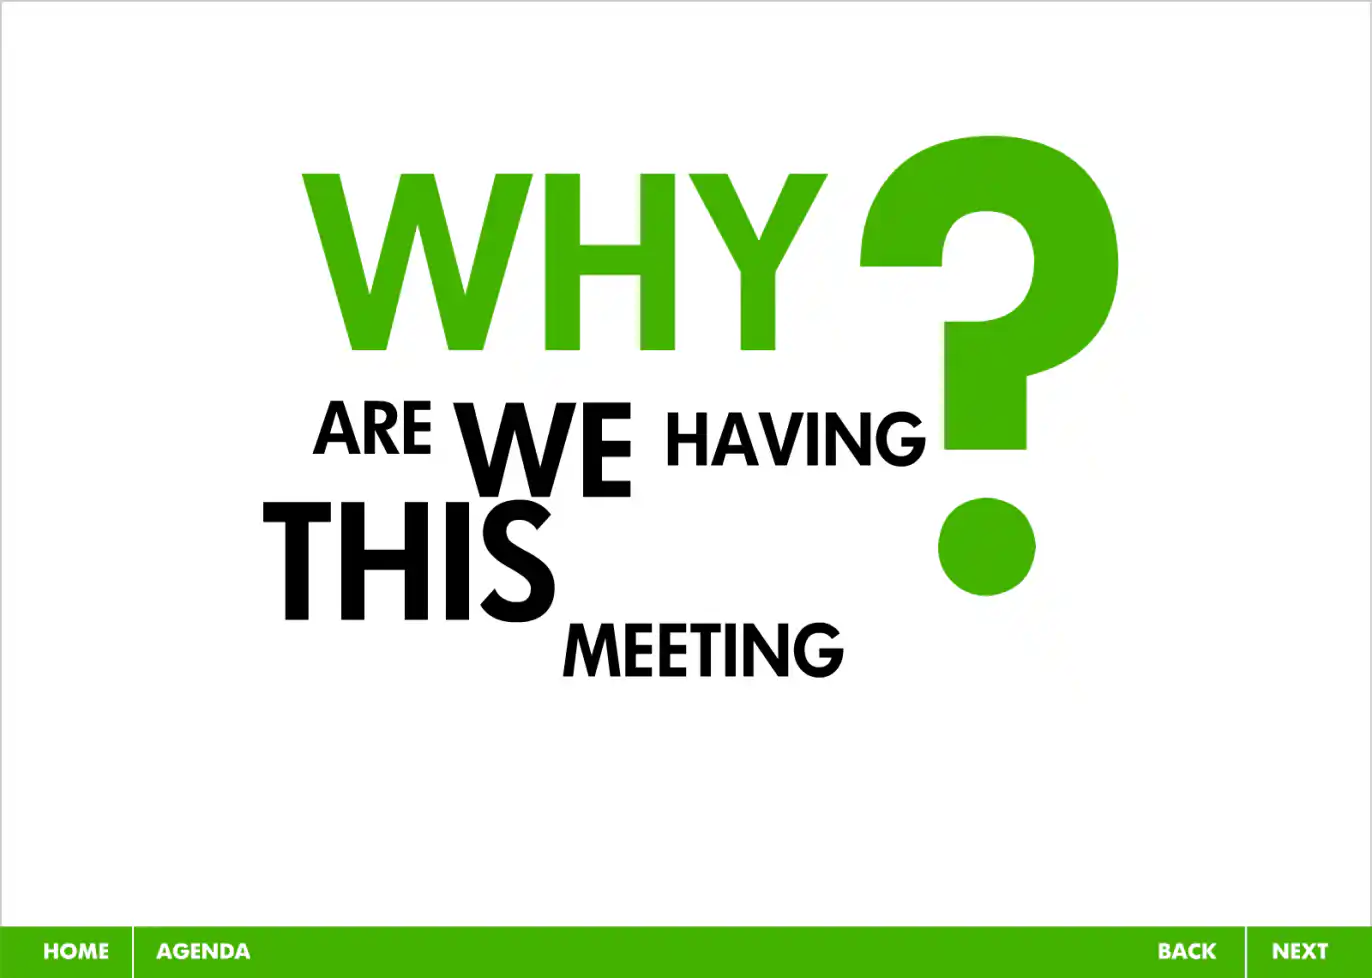 Slide 03 Section Title: Why Are We Having This Meeting